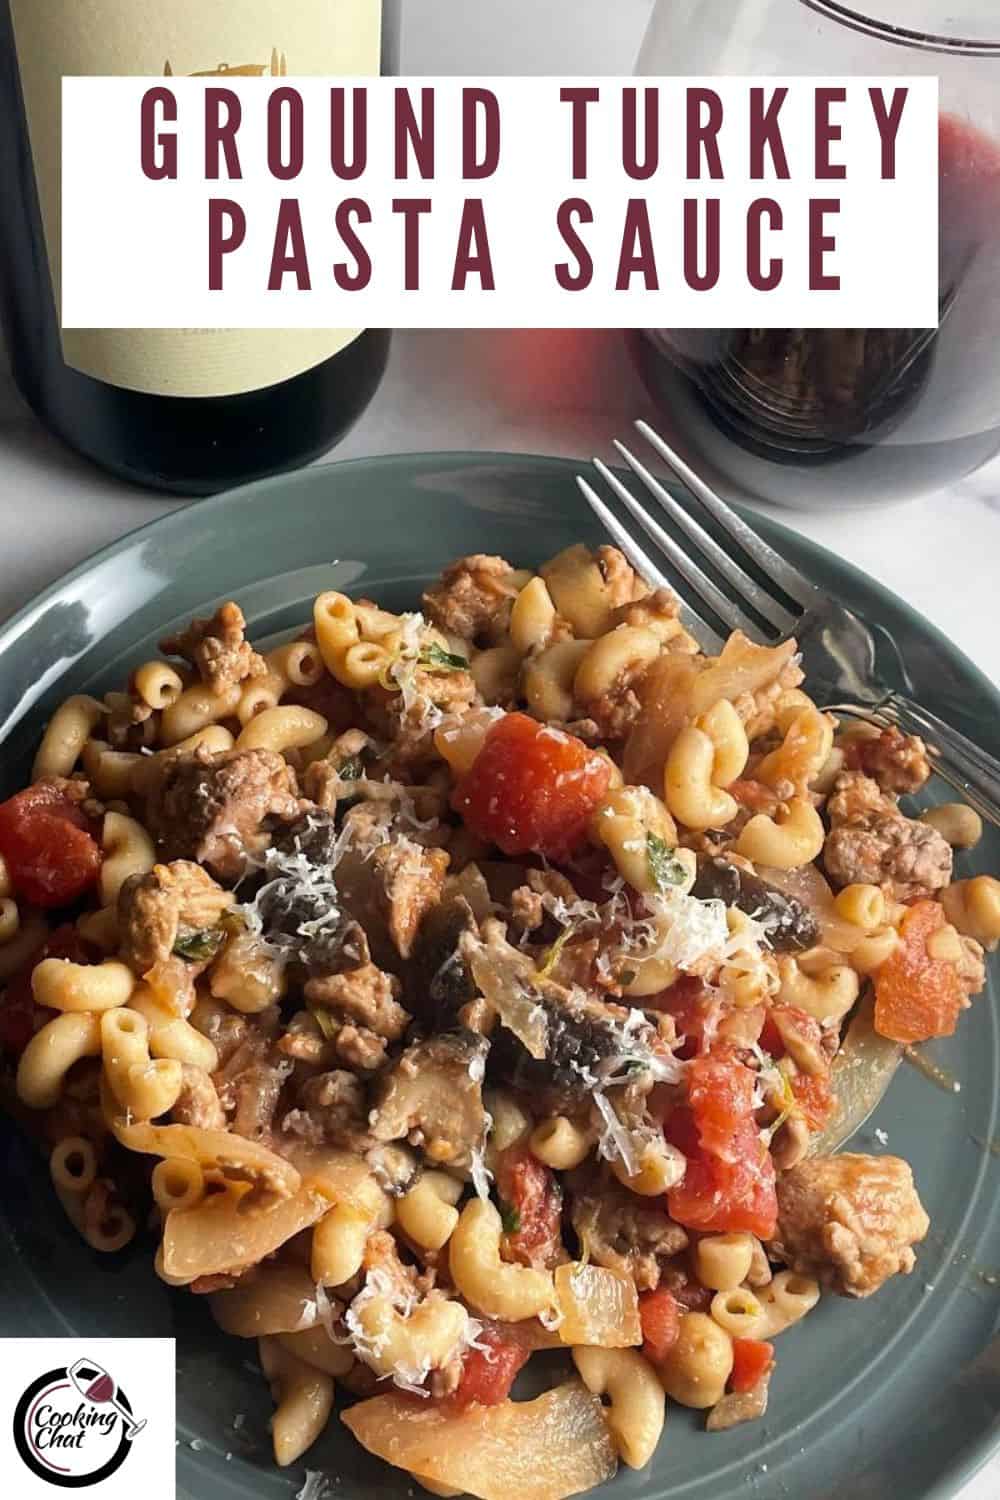 ground turkey pasta with mushrooms on a dark gray plate. Text with recipe title "Ground Turkey Pasta Sauce" at the top.